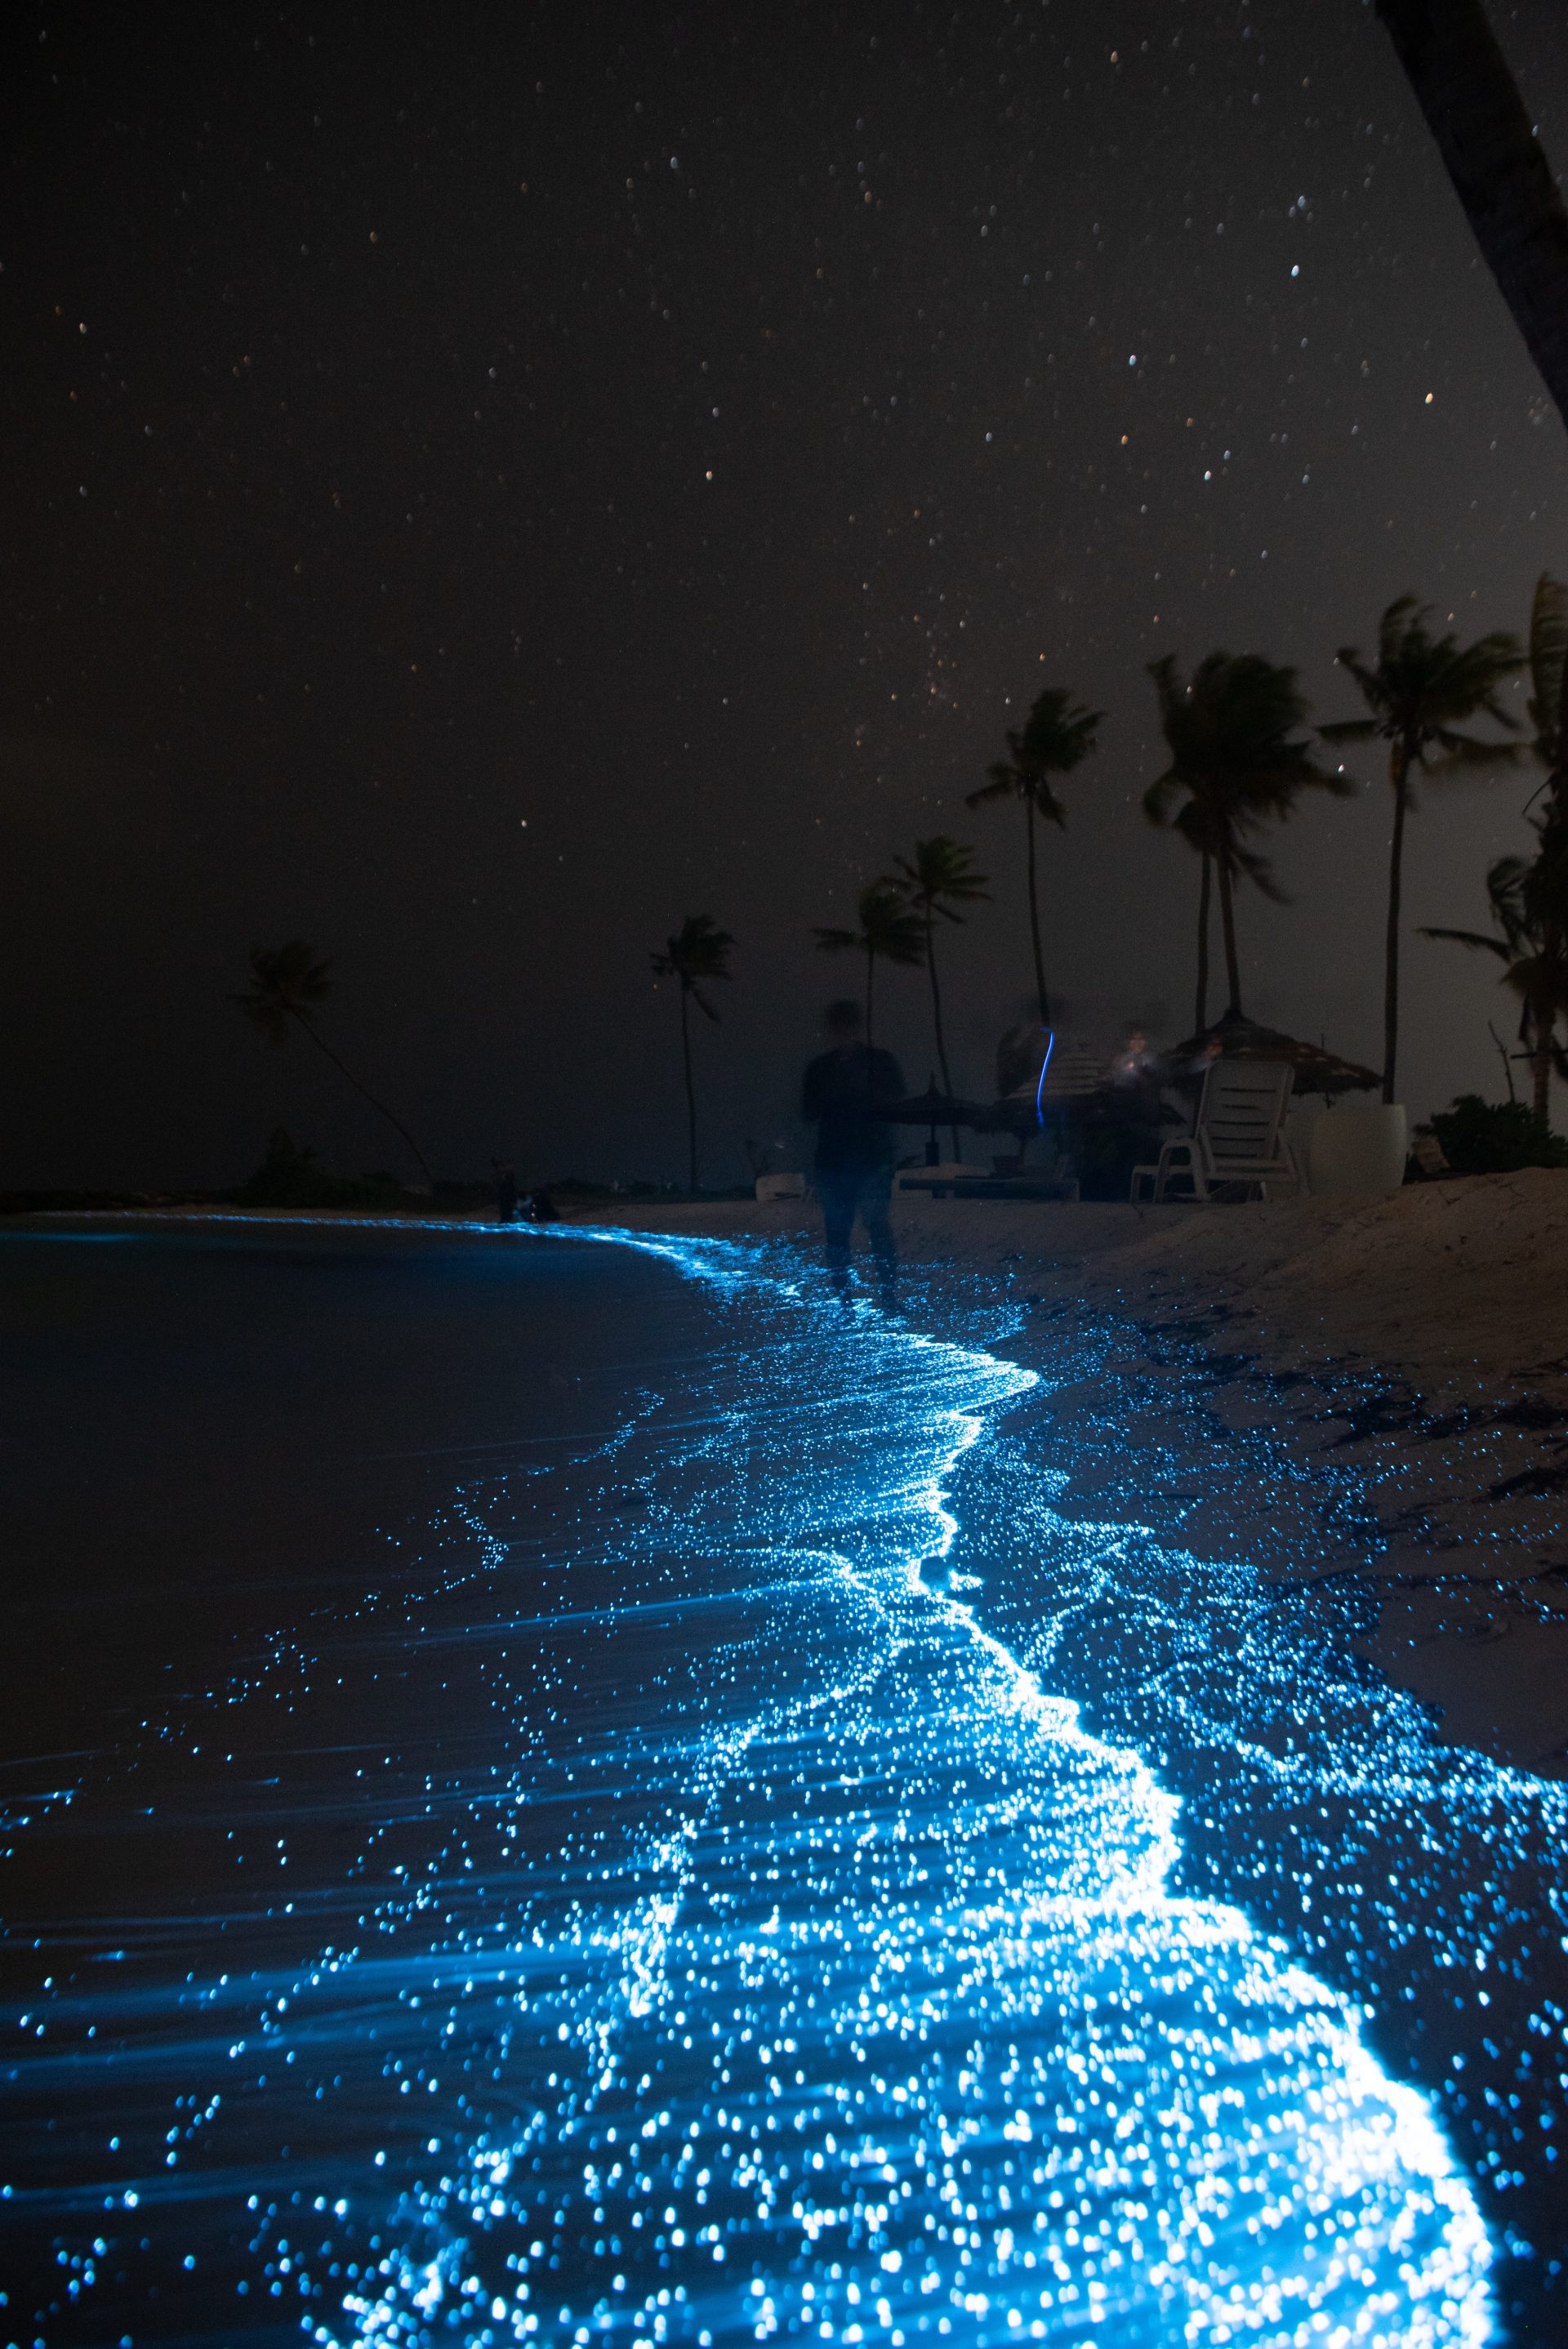 Beach with bioluminescent Planktons Discovered in Cebu